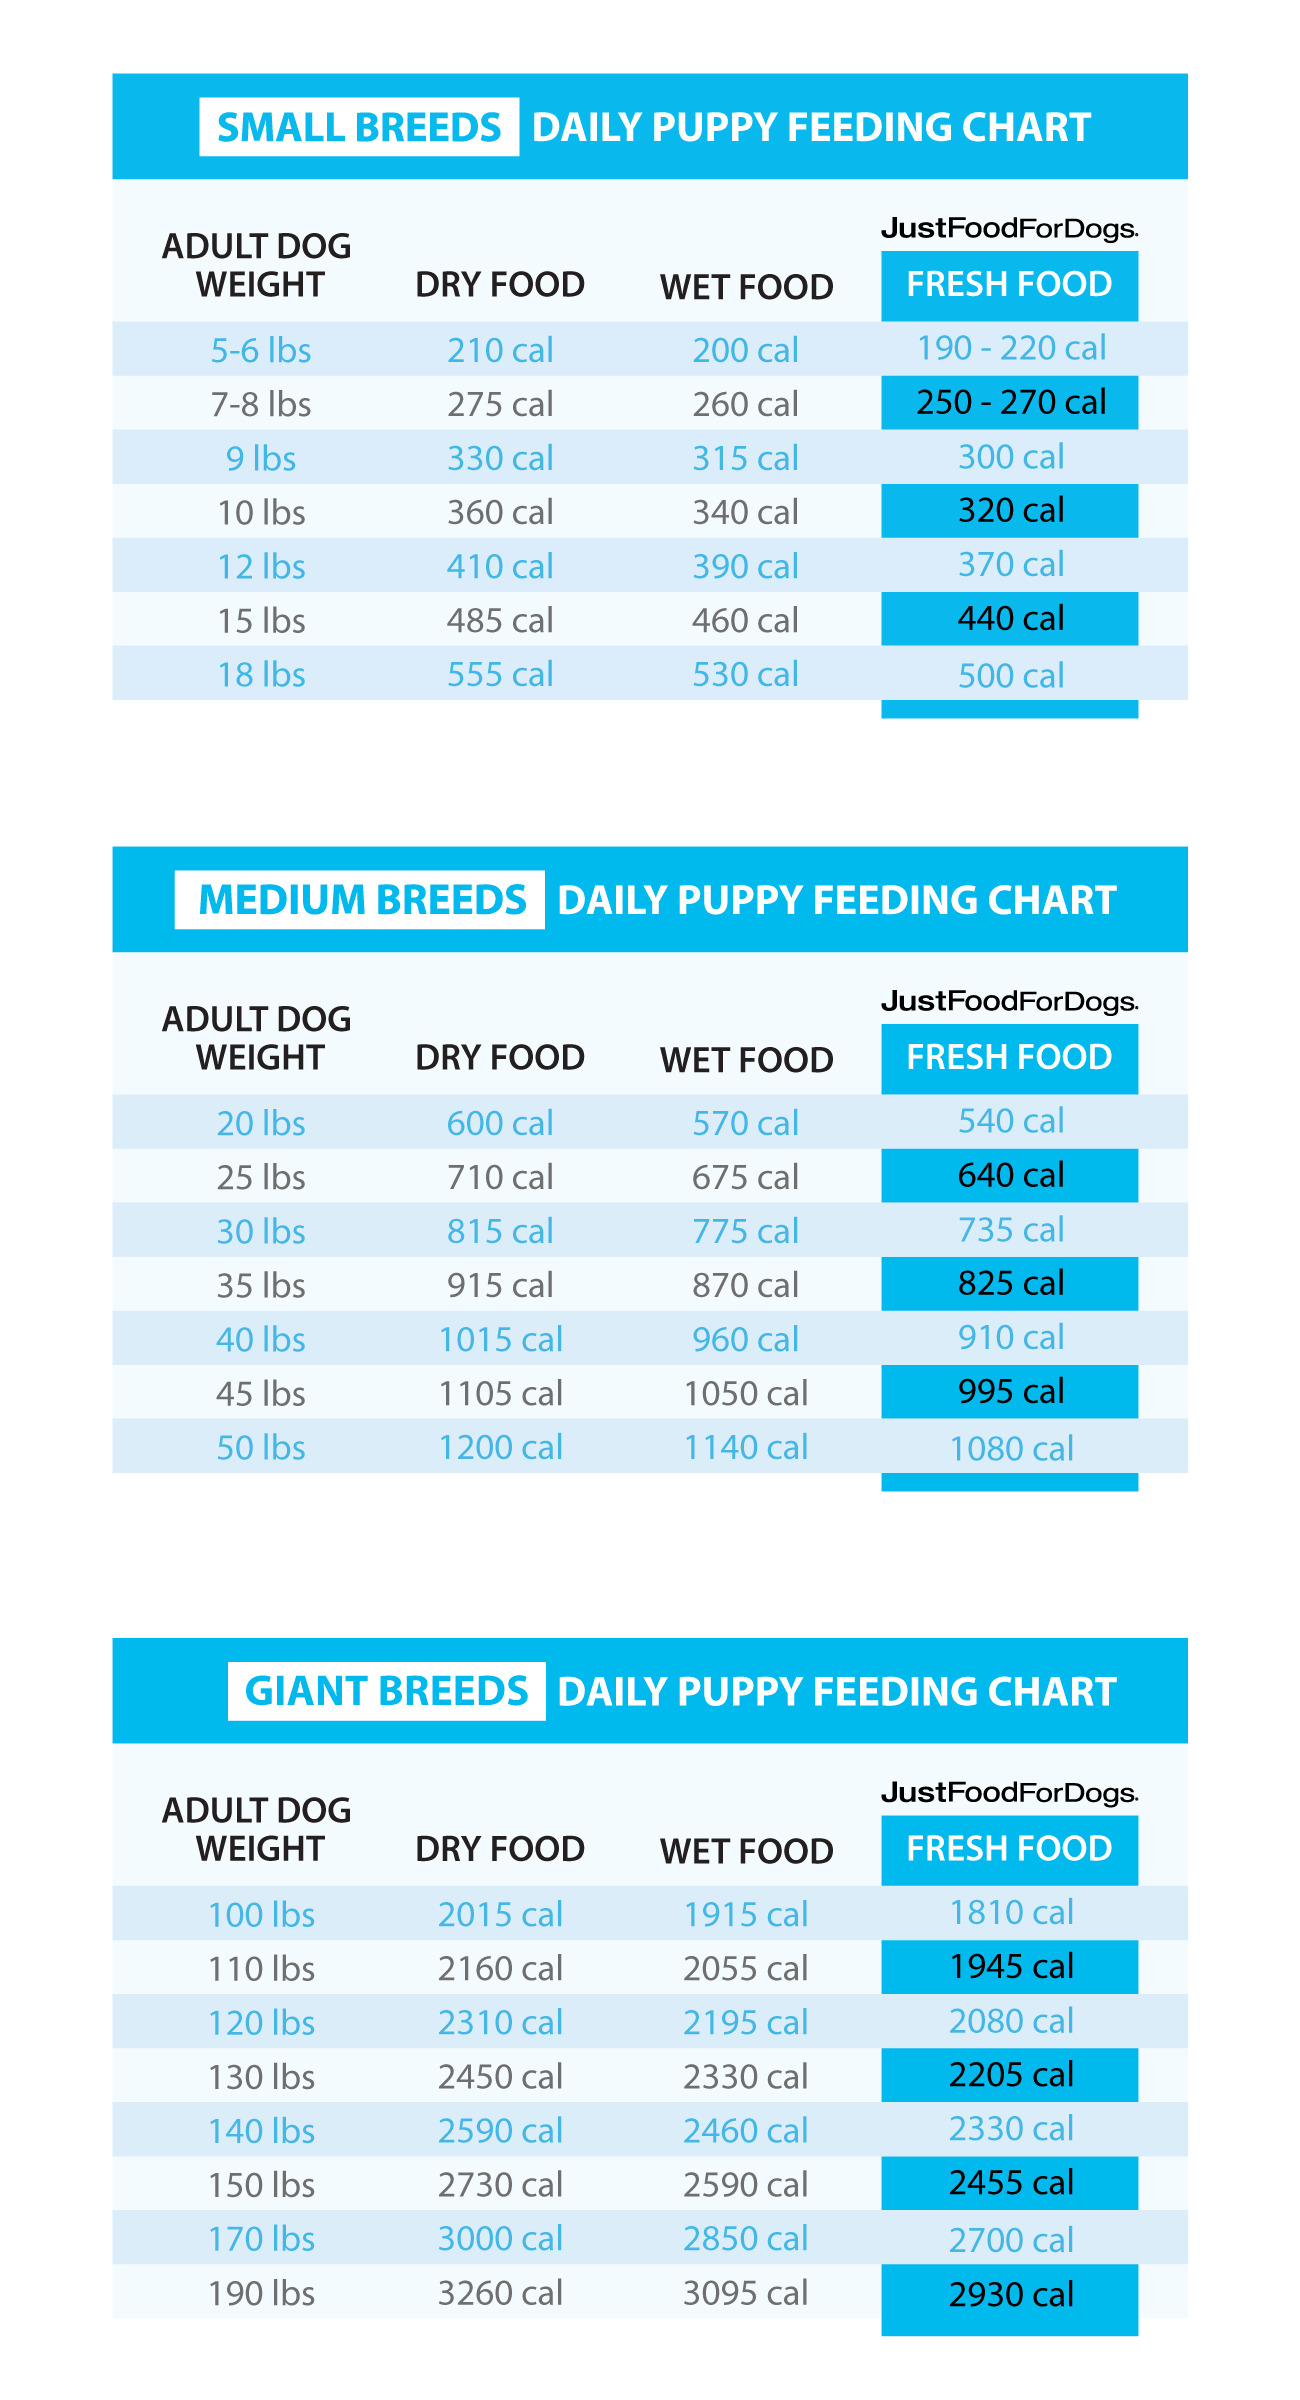 How Much to Feed a Puppy, According to Veterinarians